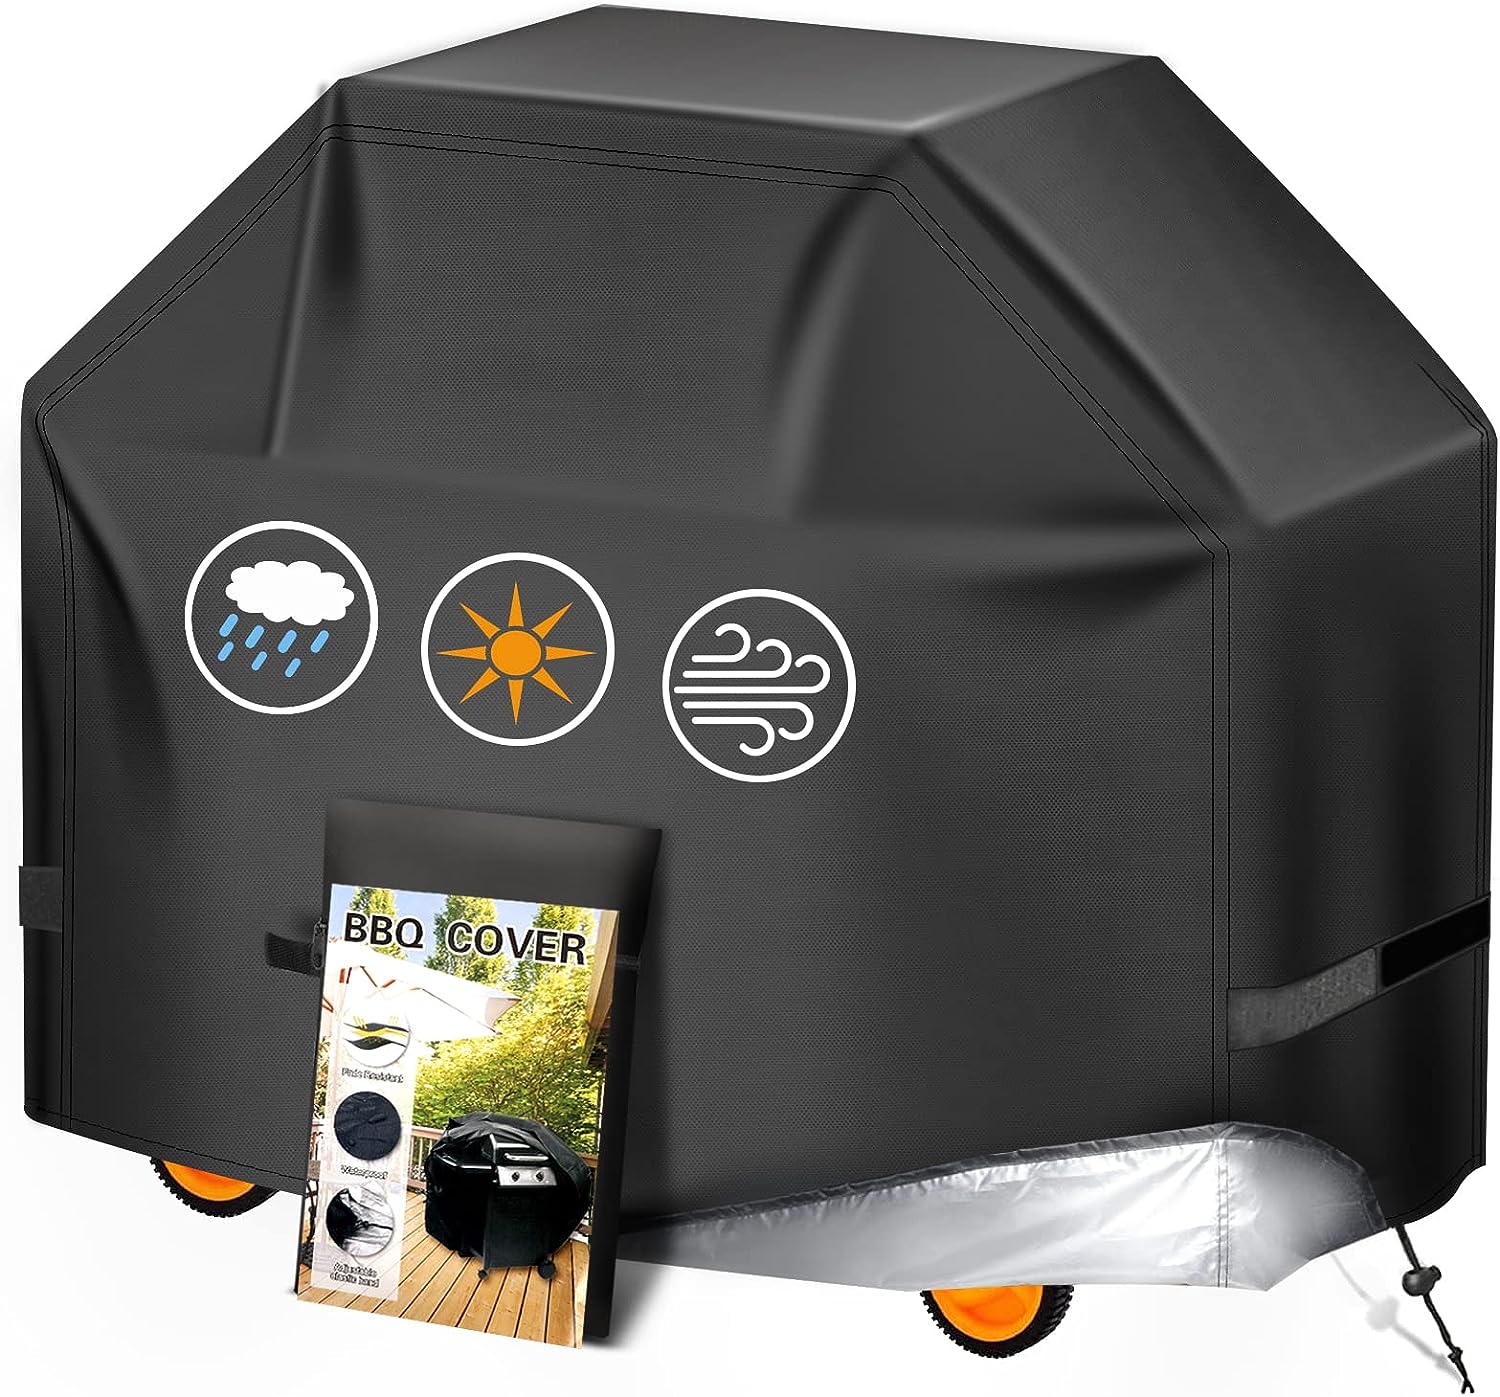 Aoretic Grill Cover, 58inch BBQ Gas Grill Cover